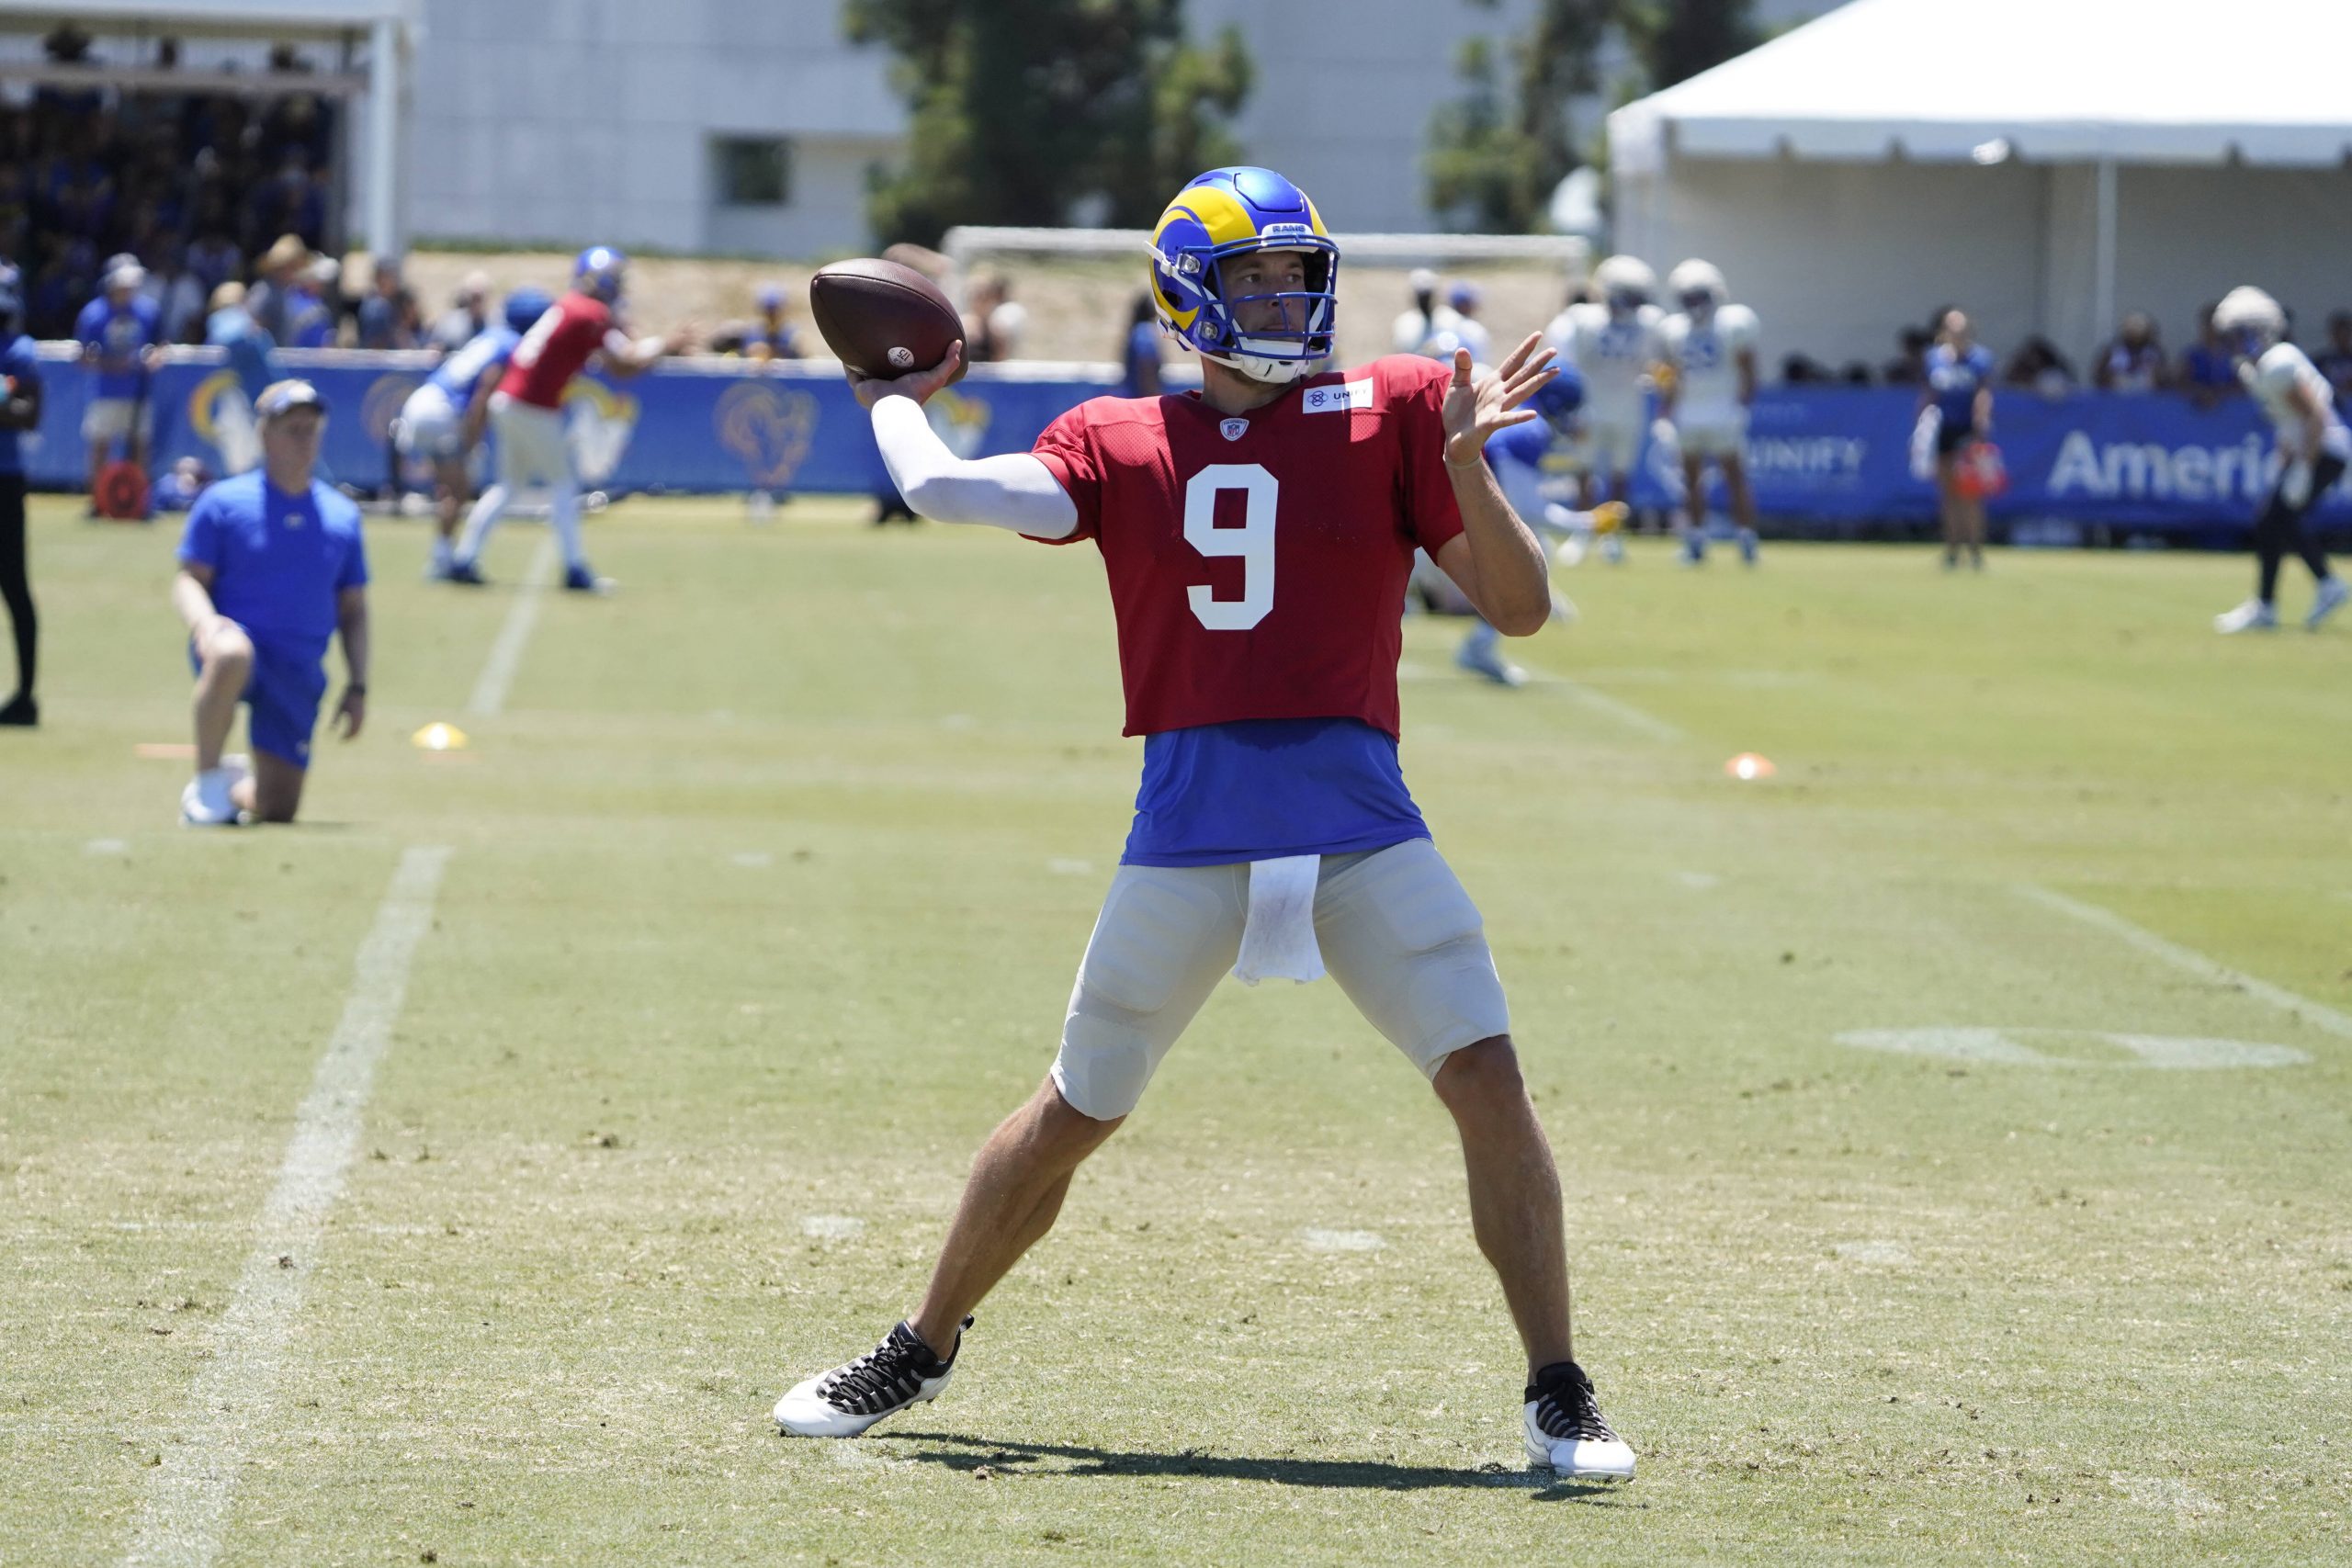 IRVINE, CA: Matthew Stafford 9 of the Rams works out during the Los Angeles Rams Training Camp on 06, 2022, at UC Irvine in Irvine, CA. Photo by Icon Sportswire NFL, American Football Herren, USA AUG 06 Los Angeles Rams Training Camp Icon592220806323